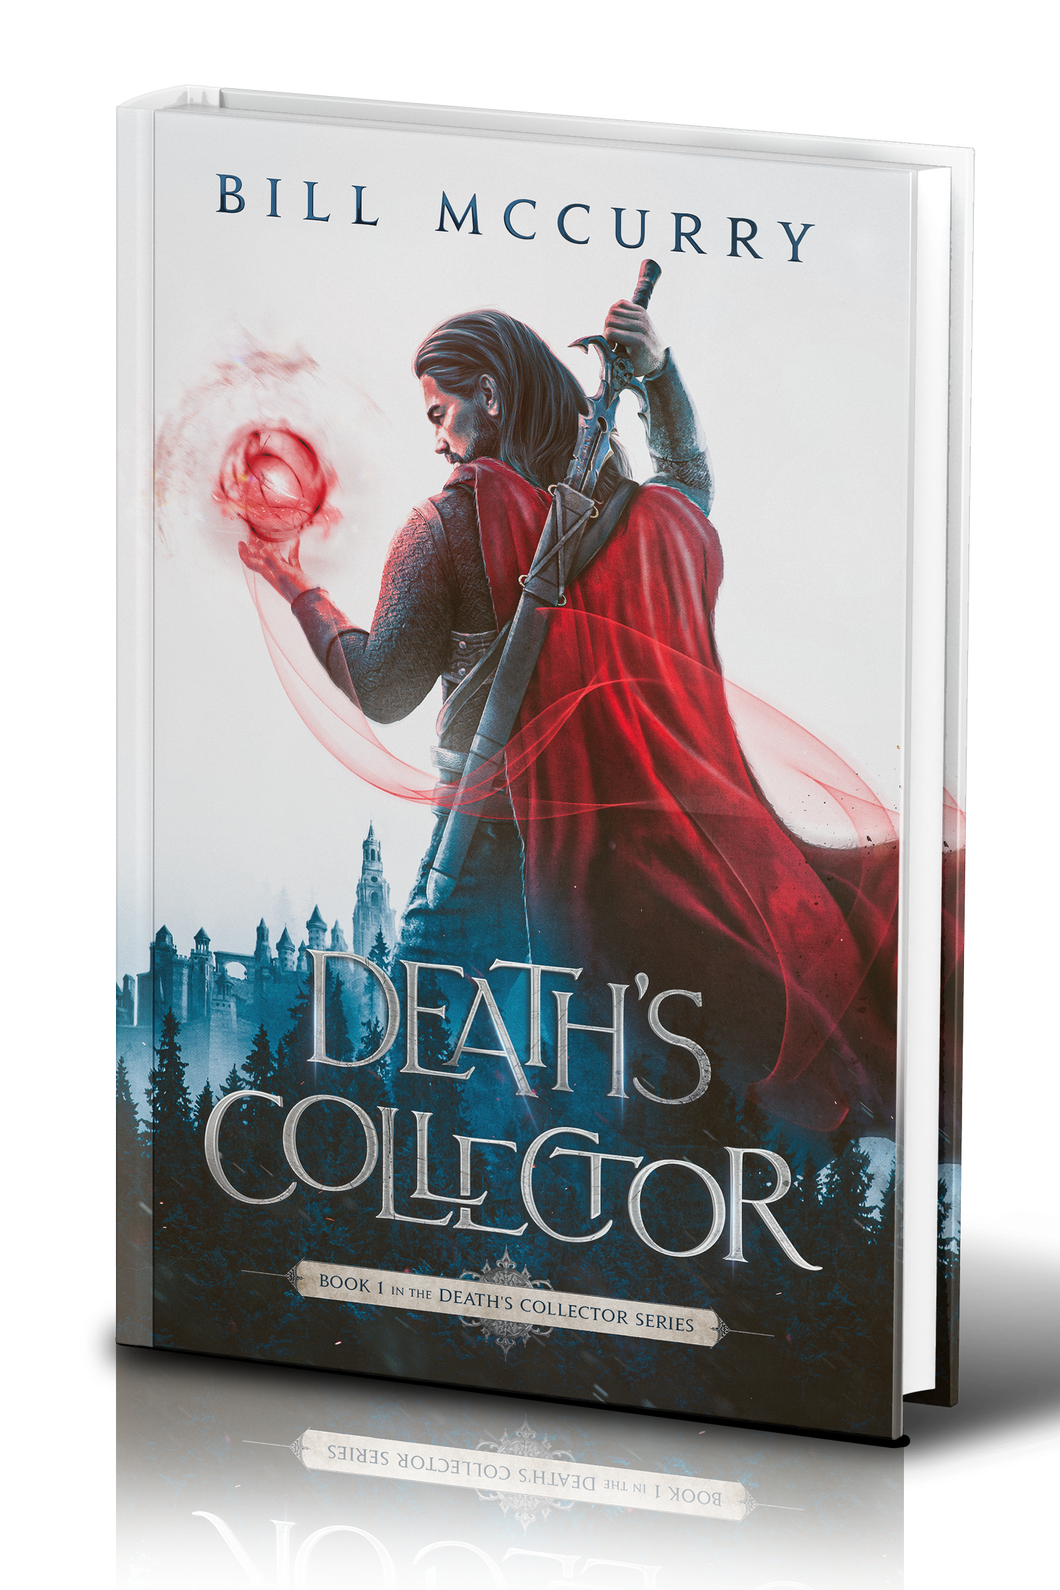 Death's Collector 3rd Edition (paperback)